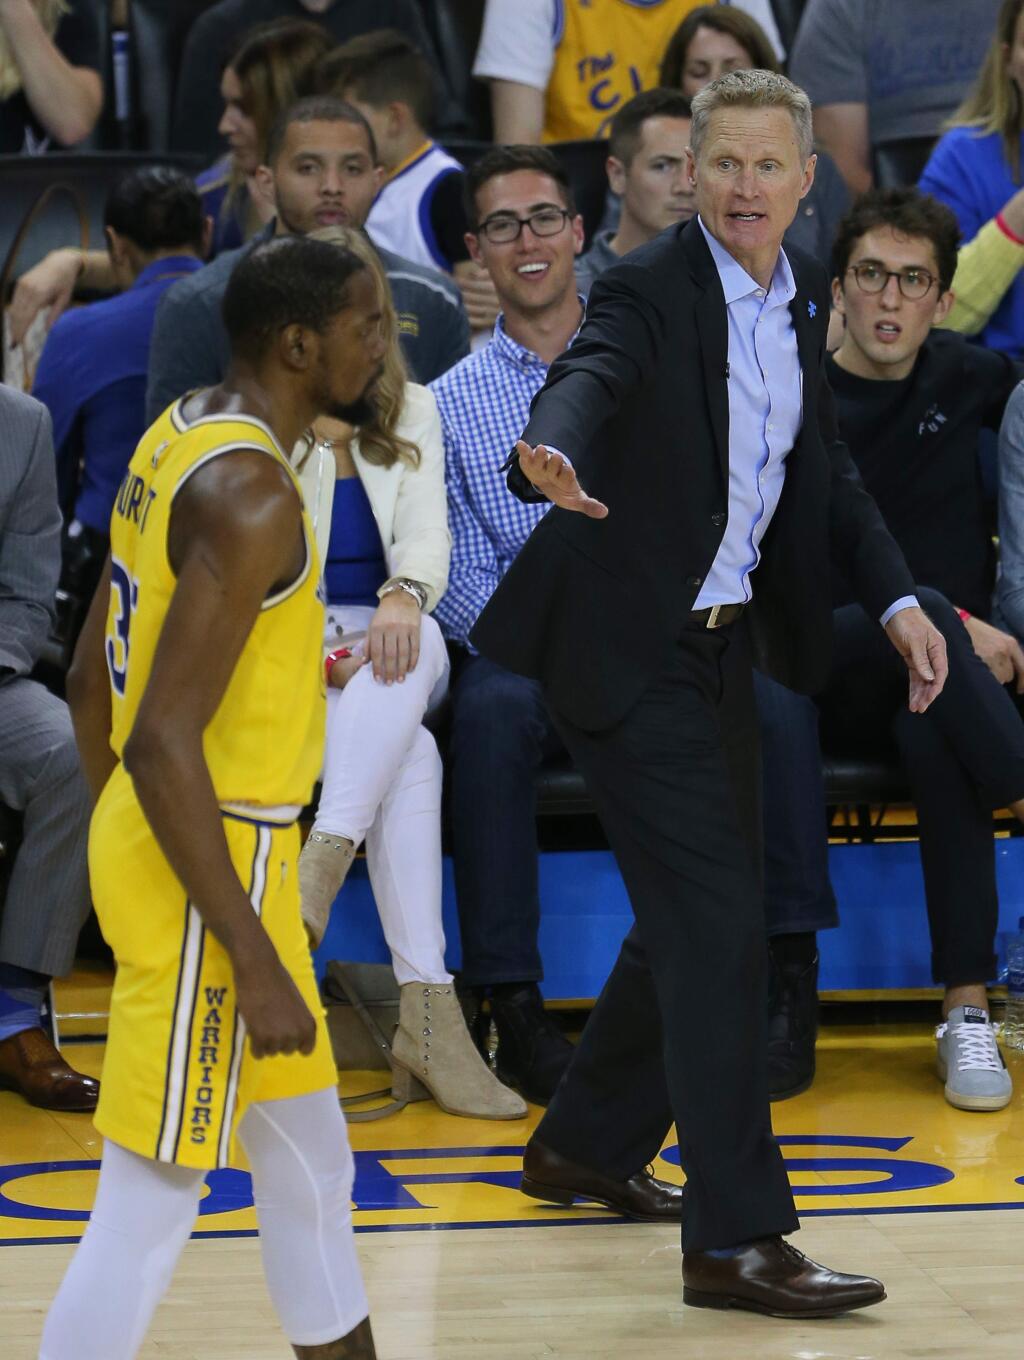 Warriors coach Steve Kerr tries to calm down Kevin Durant during their game against the Denver Nuggets in Oakland on Tuesday, April 2, 2019. Durant was ejected from the game. (Christopher Chung / The Press Democrat)